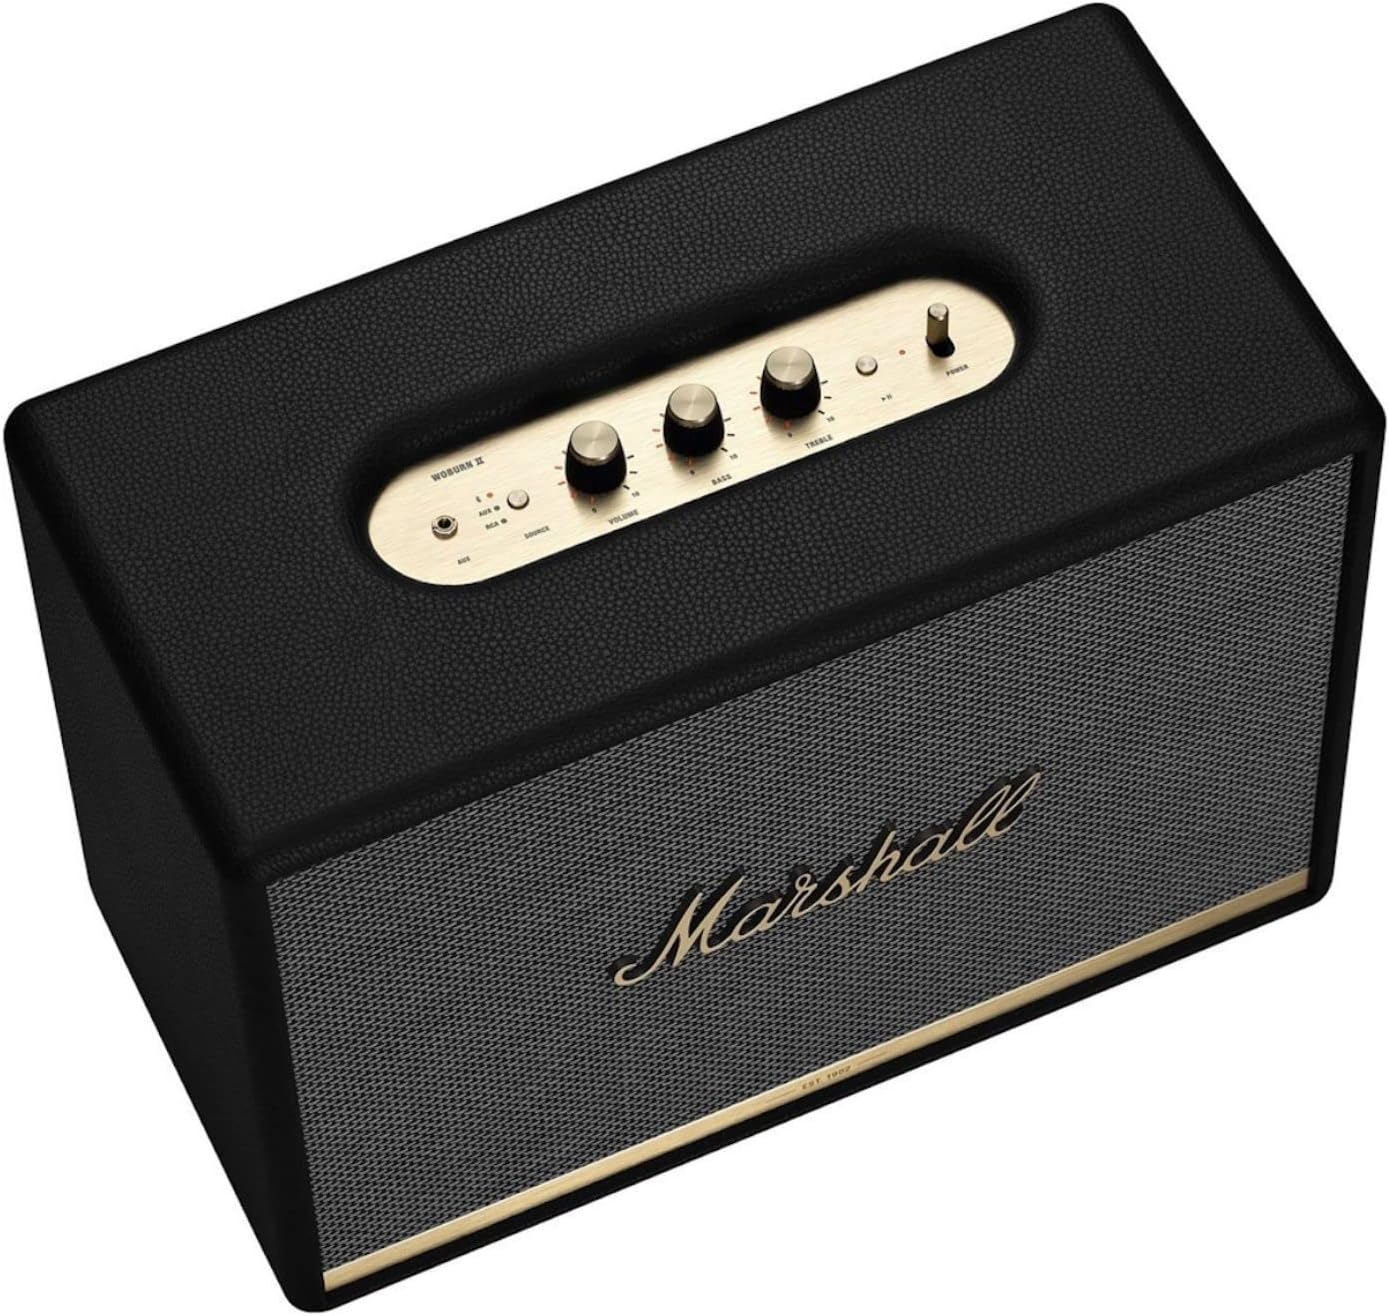 Marshall Woburn II Speaker - Bluetooth 5.0 for lossless wireless sound up to 30 feet away. 7340055363075